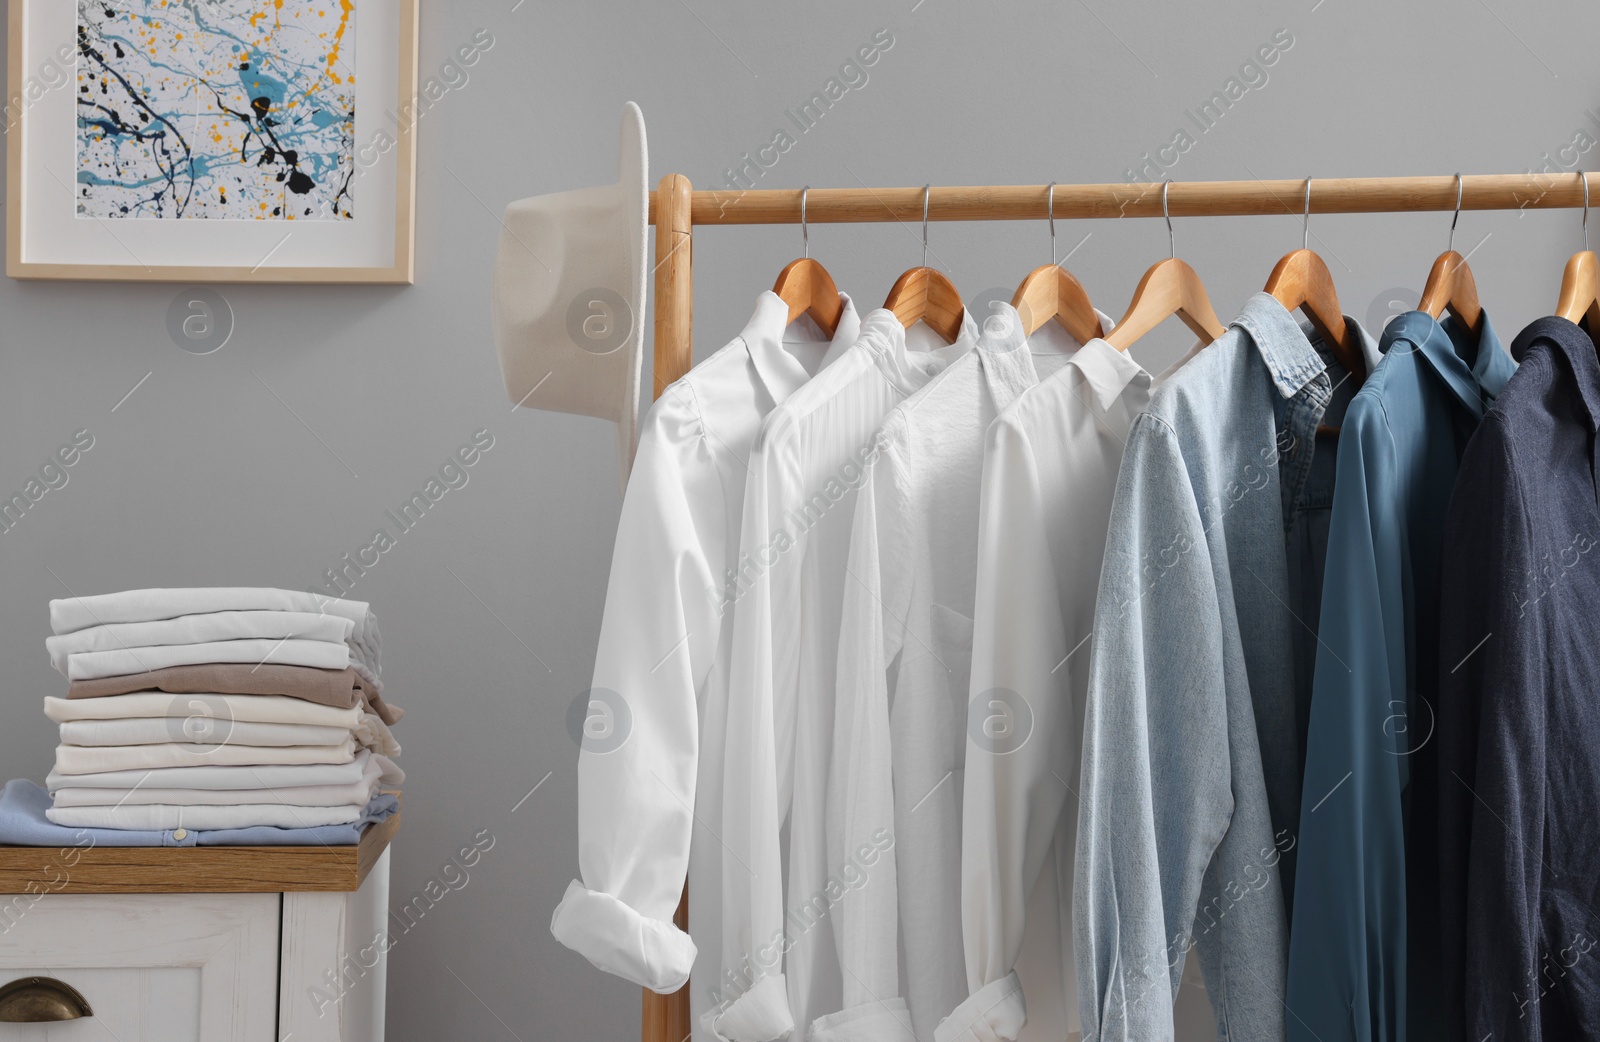 Photo of Rack with different stylish shirts, hat and chest of drawers near grey wall in room. Organizing clothes